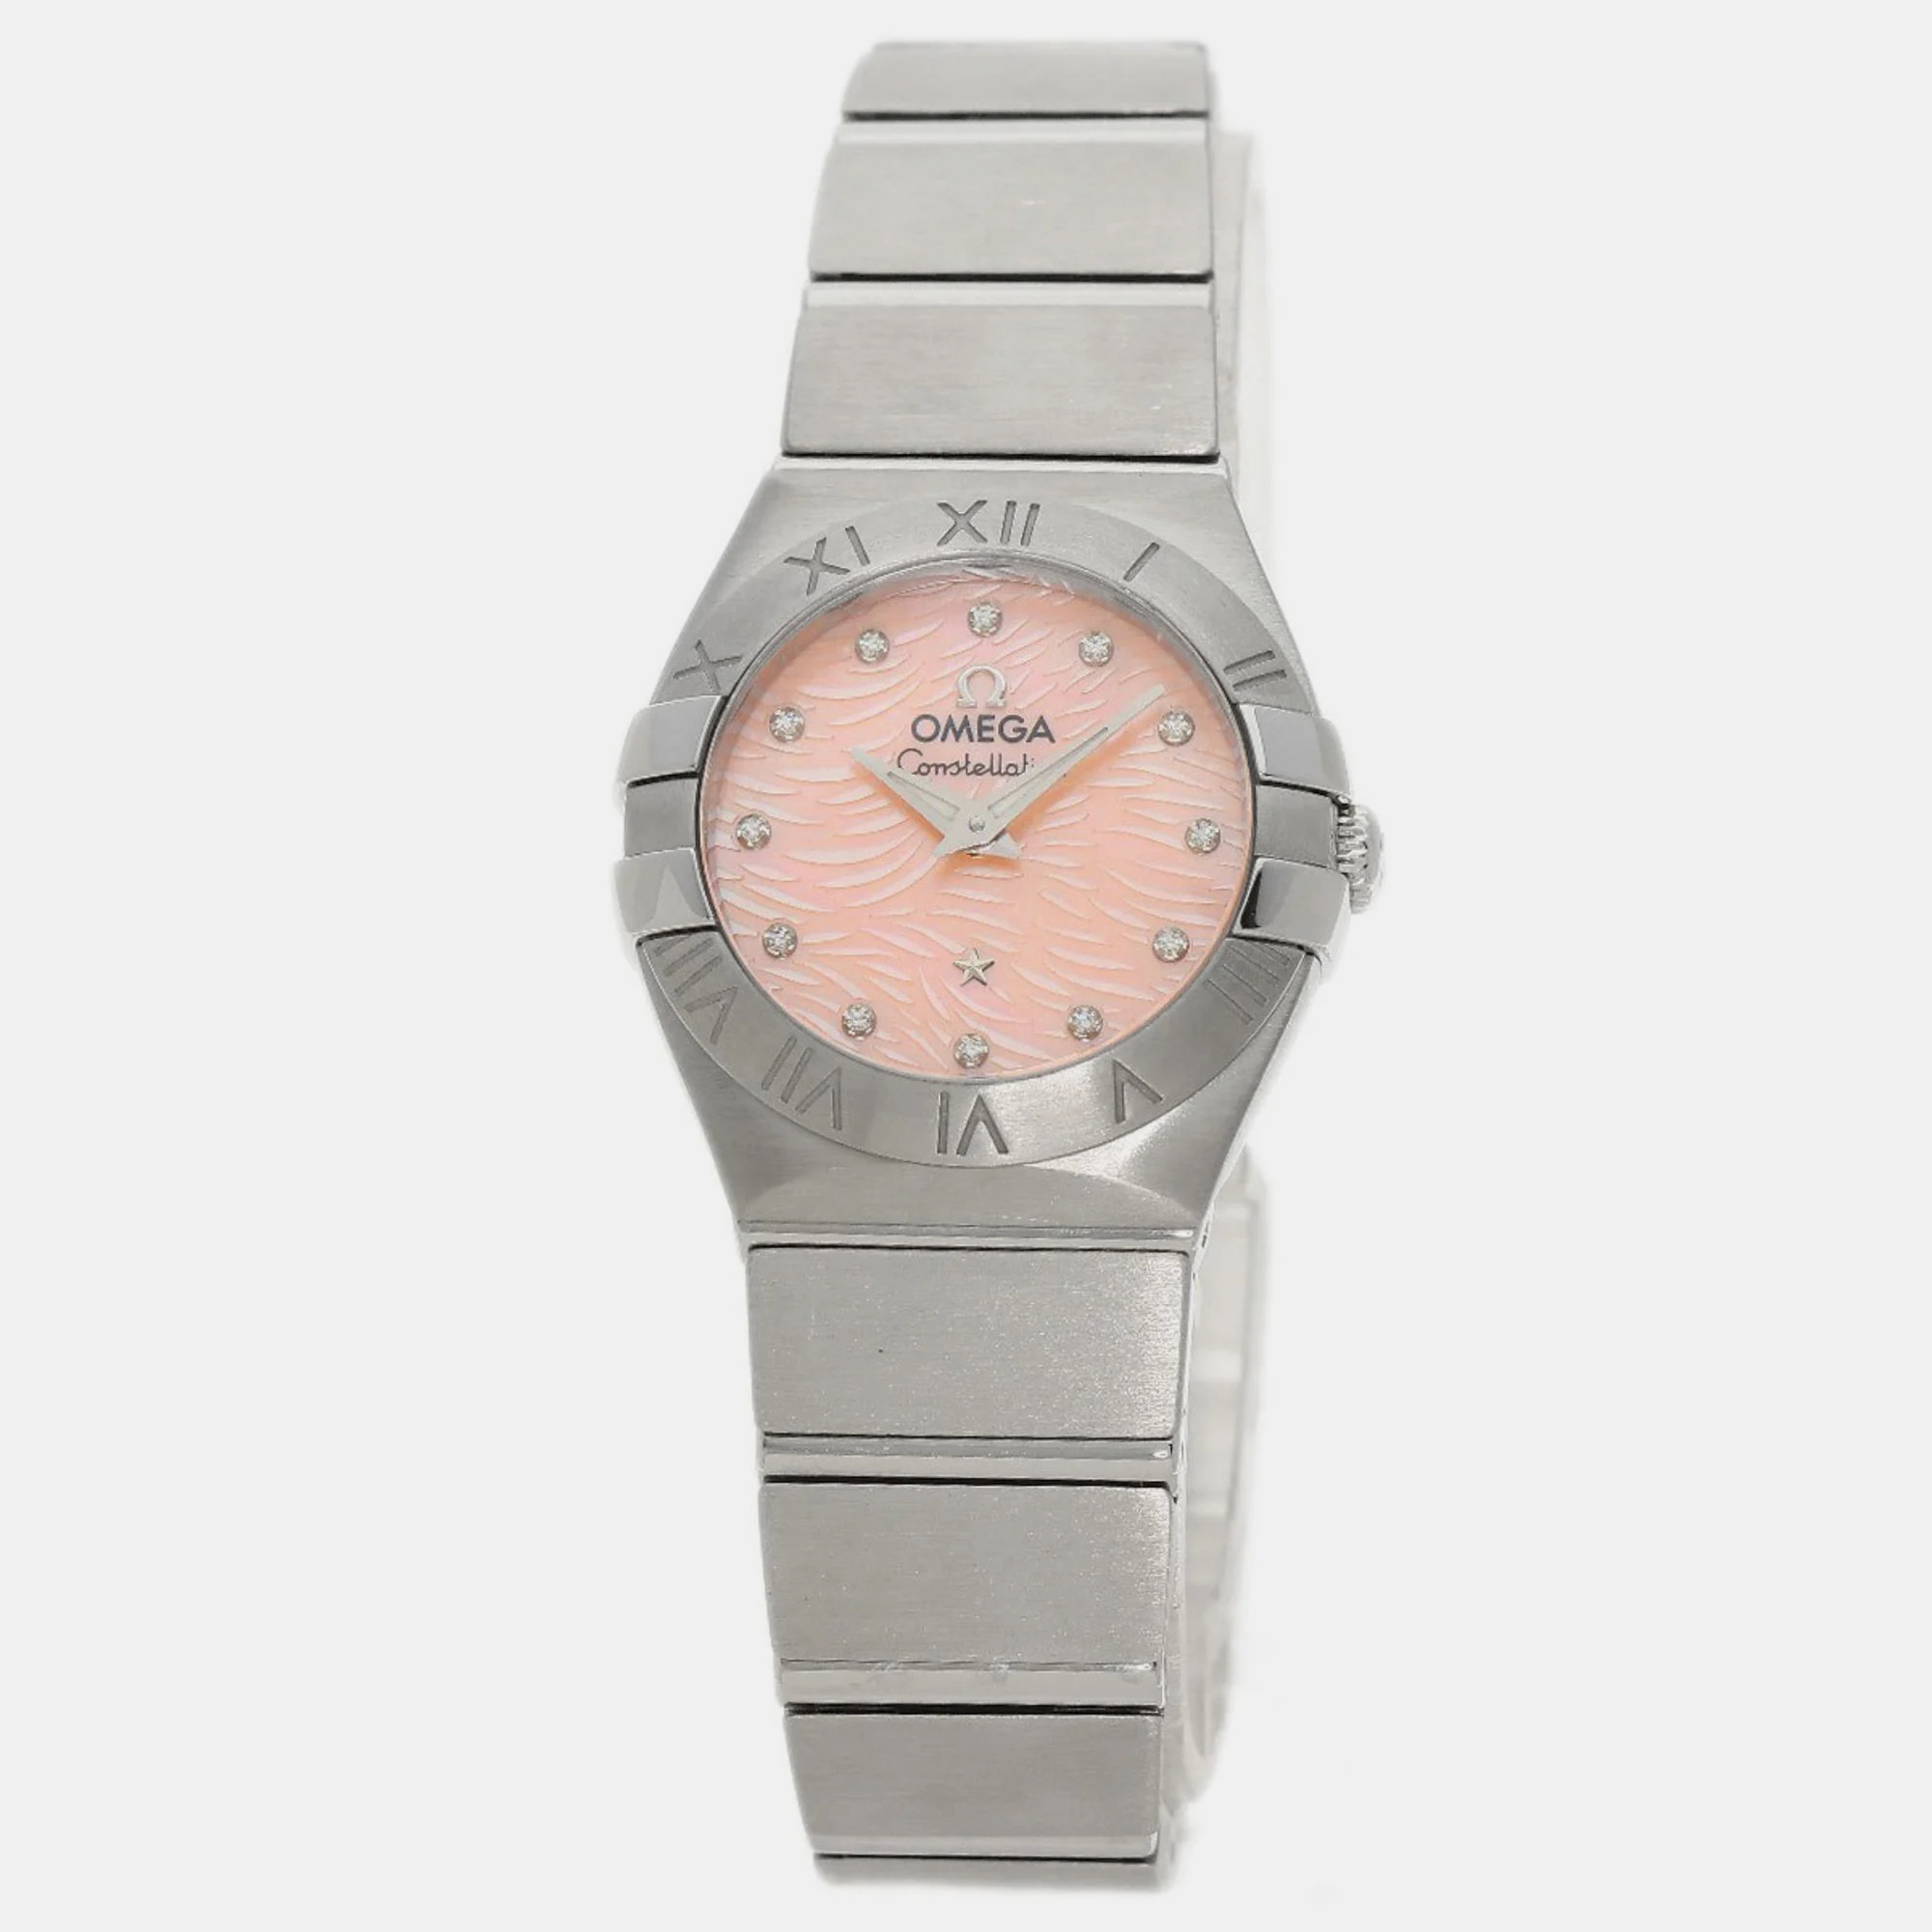 Pre-owned Omega Pink Shell Diamond Stainless Steel Constellation 123.10.24.60.57.002 Quartz Women's Wristwatch 25 Mm